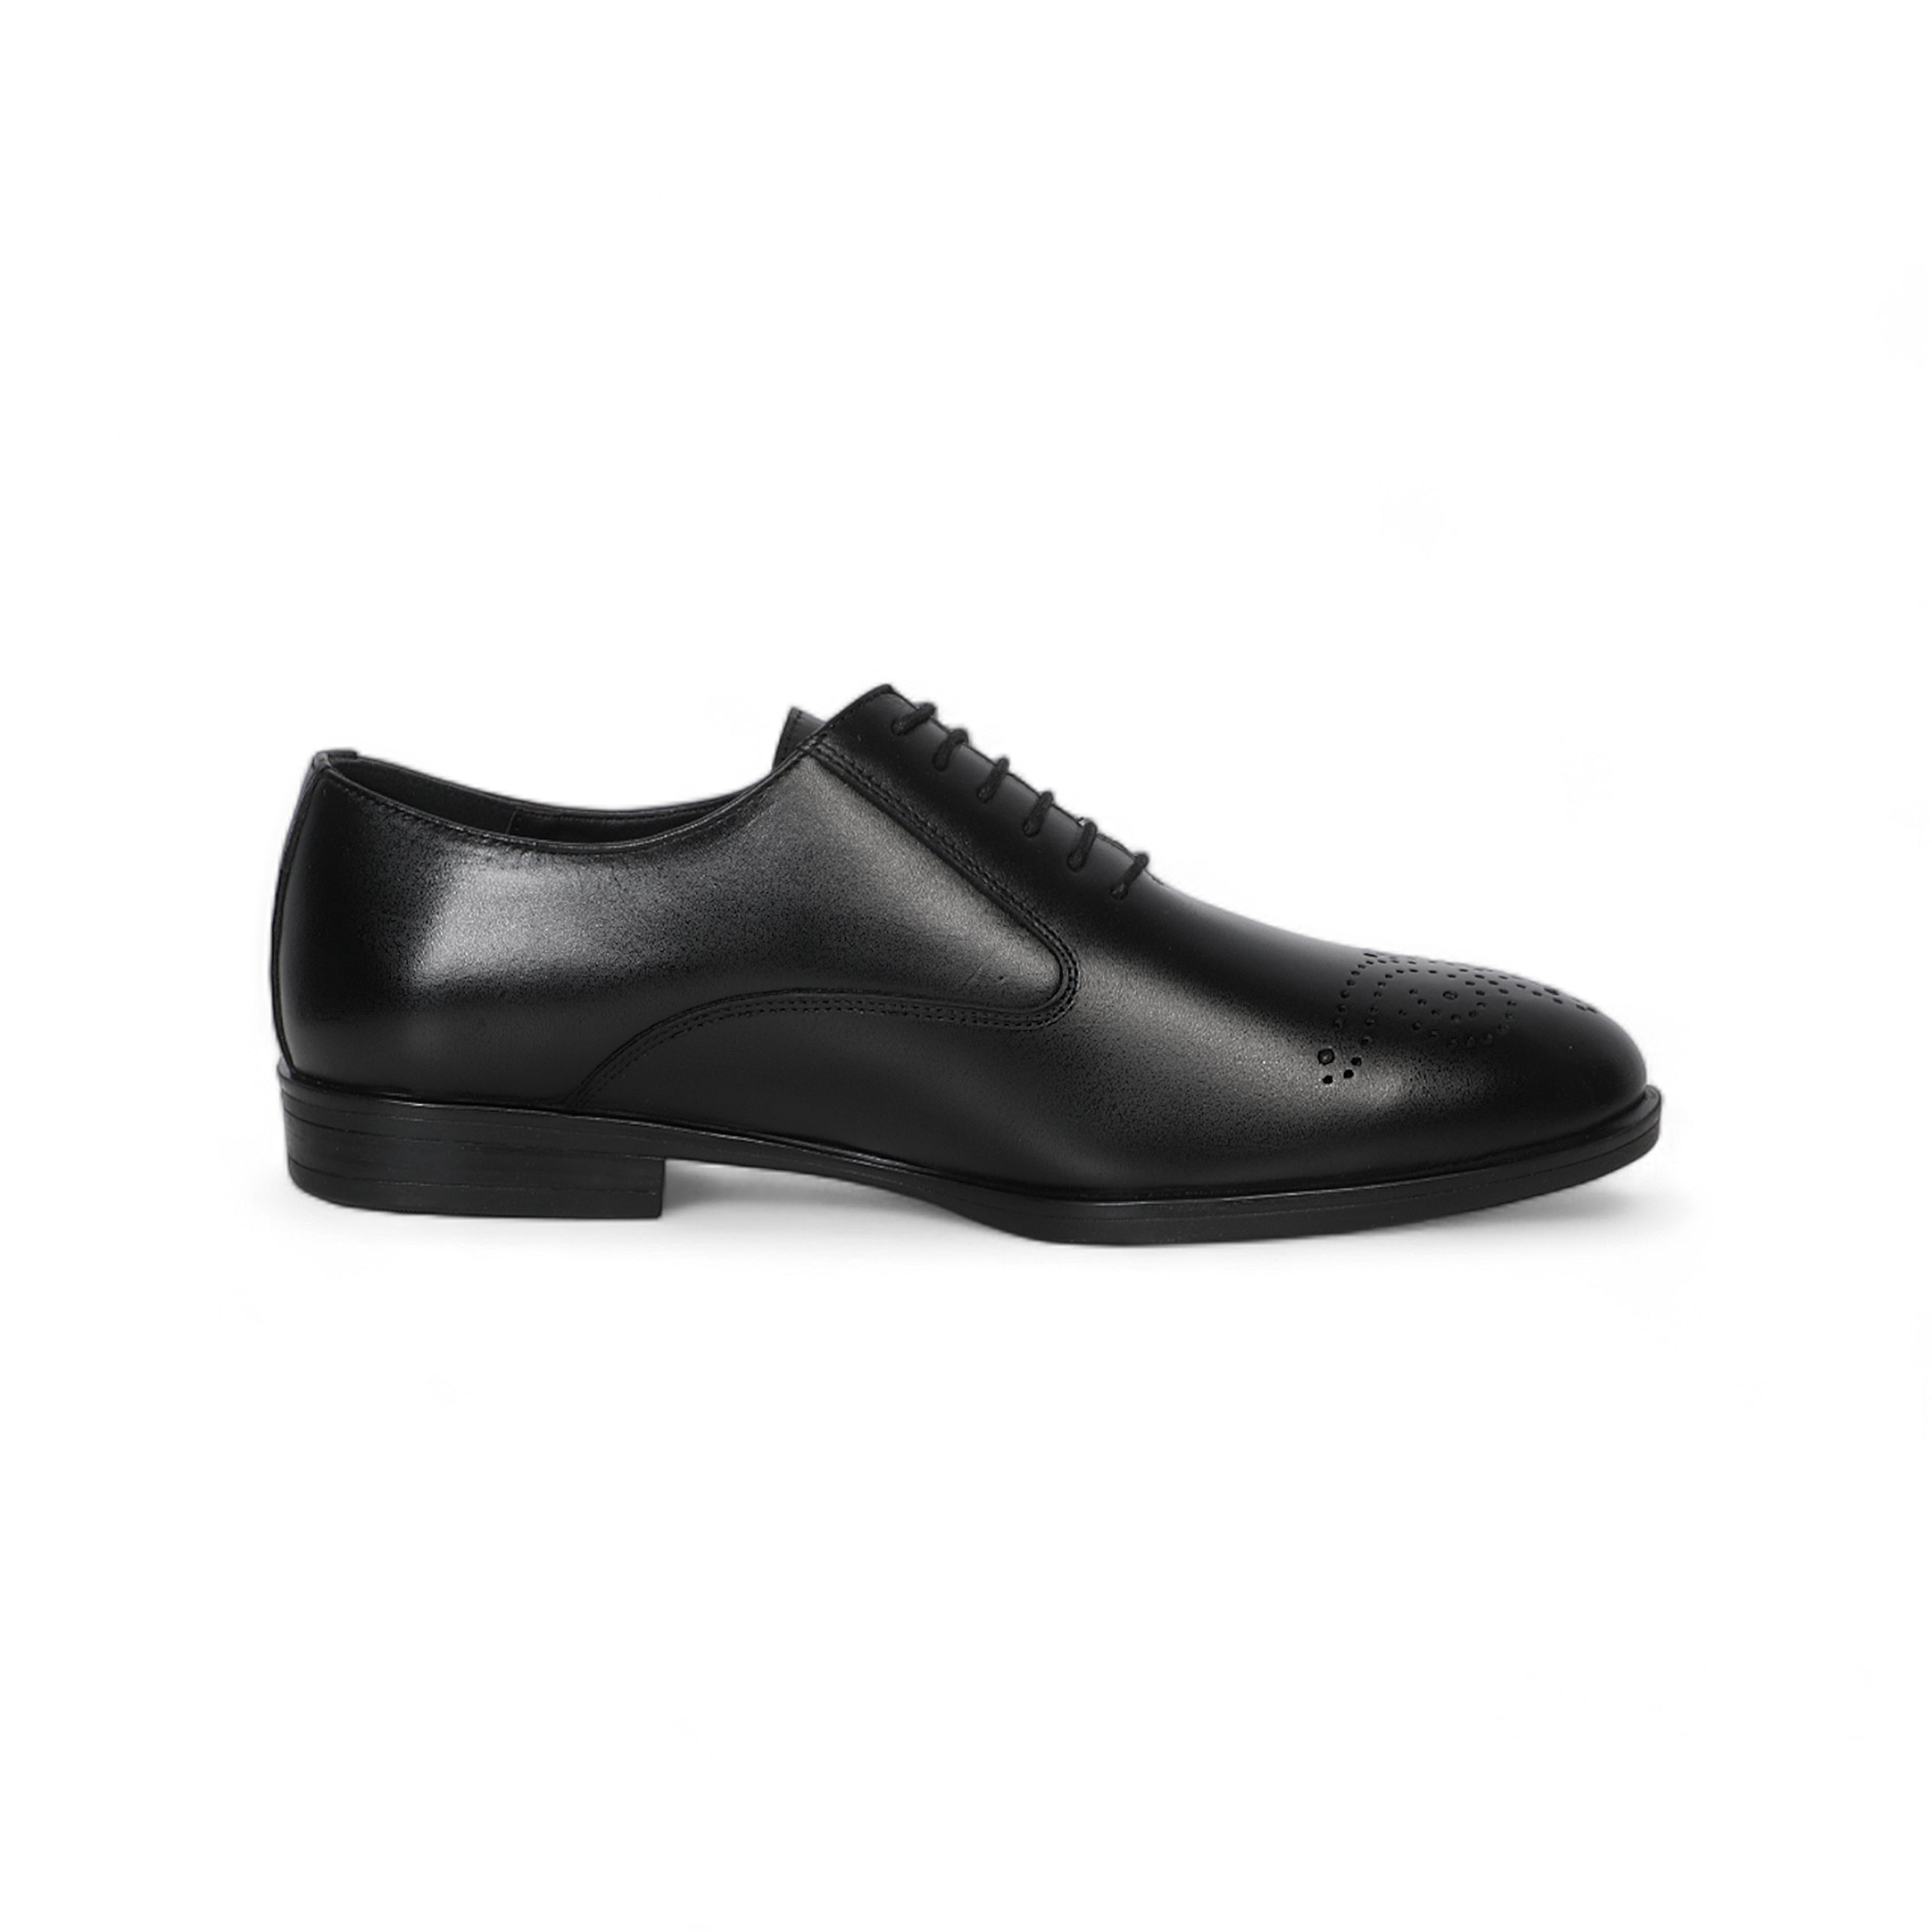 Classic Corporate Oxford Lace-Up Black Shoes